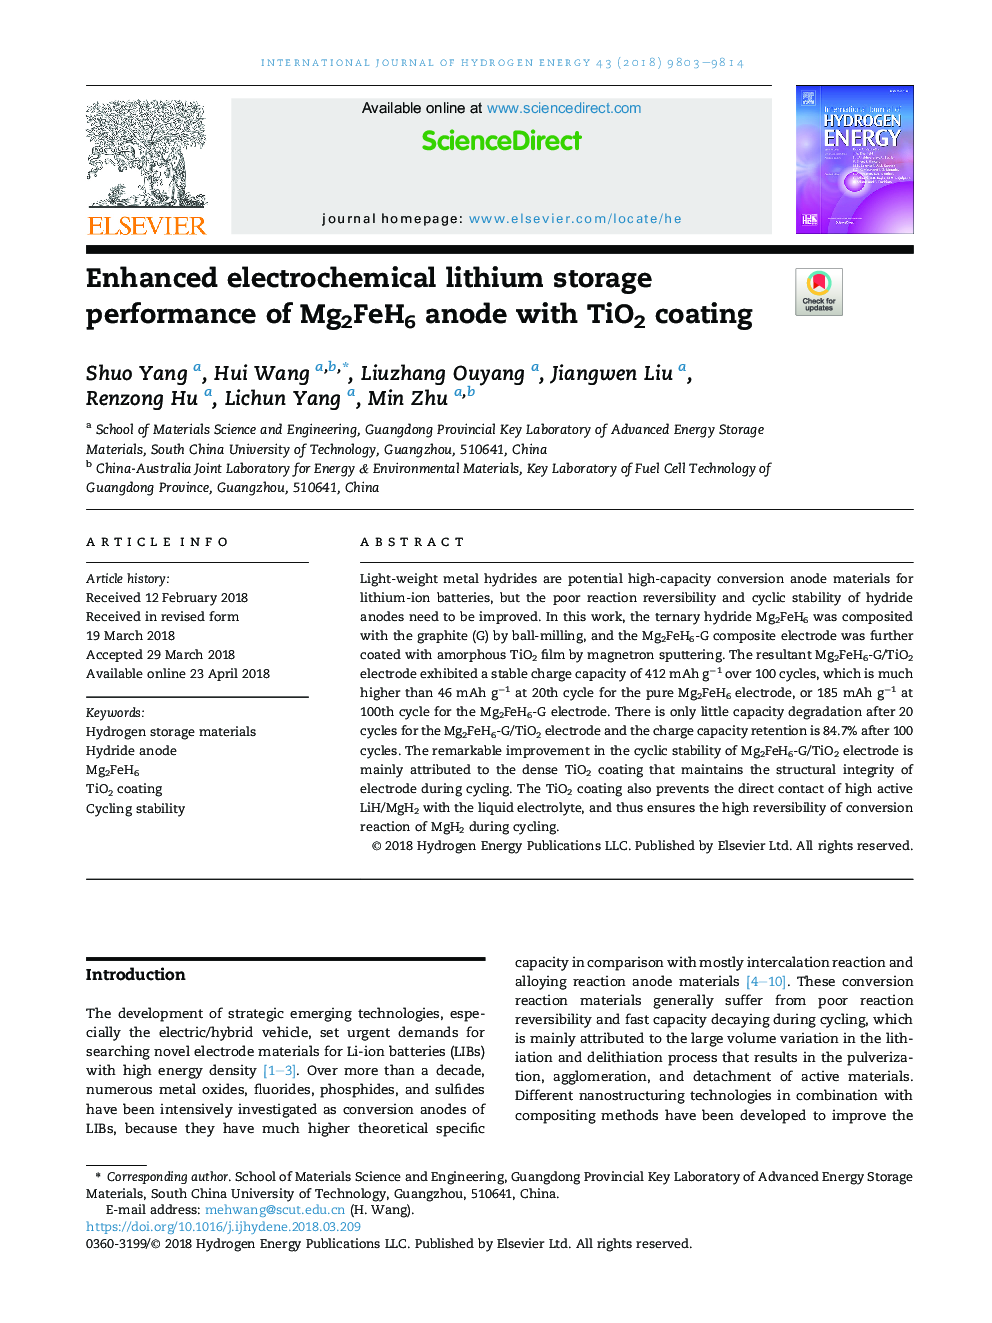 Enhanced electrochemical lithium storage performance of Mg2FeH6 anode with TiO2 coating